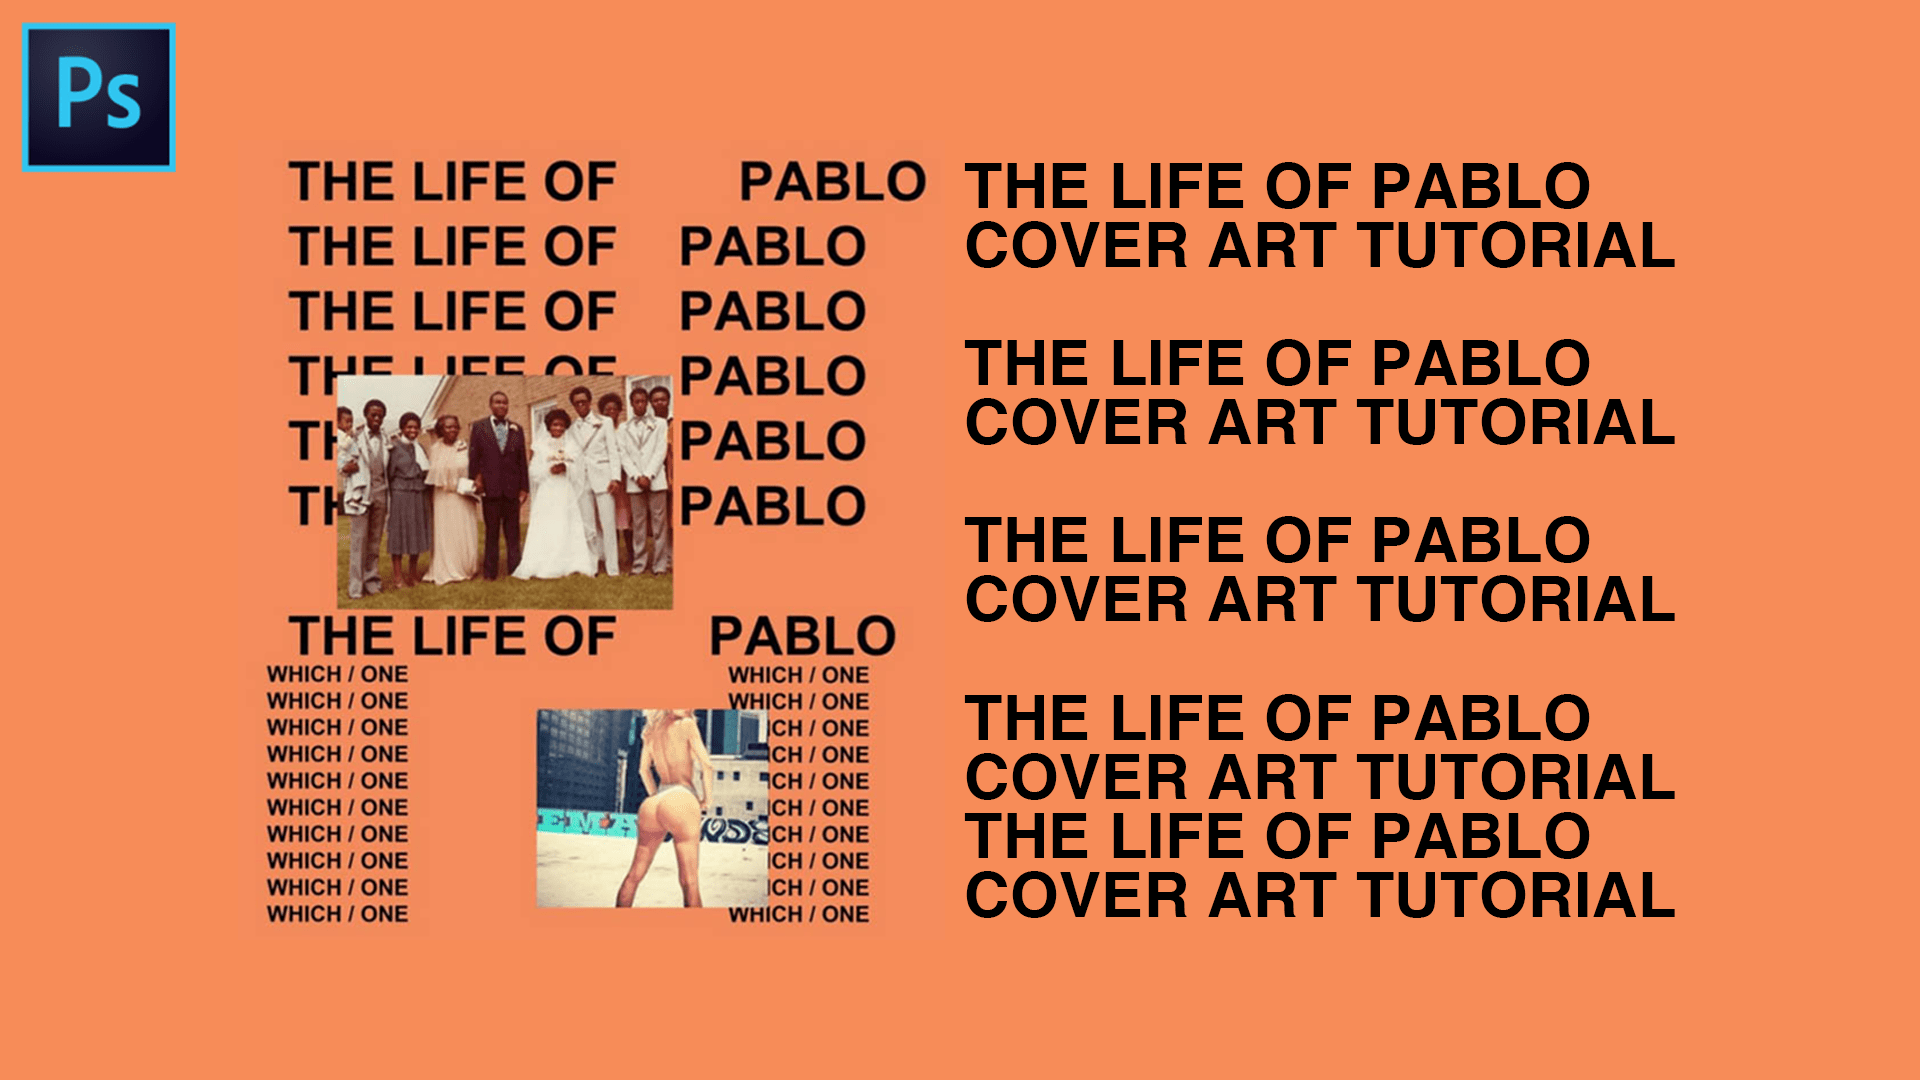 Create your own The Life of Pablo album cover  The Verge